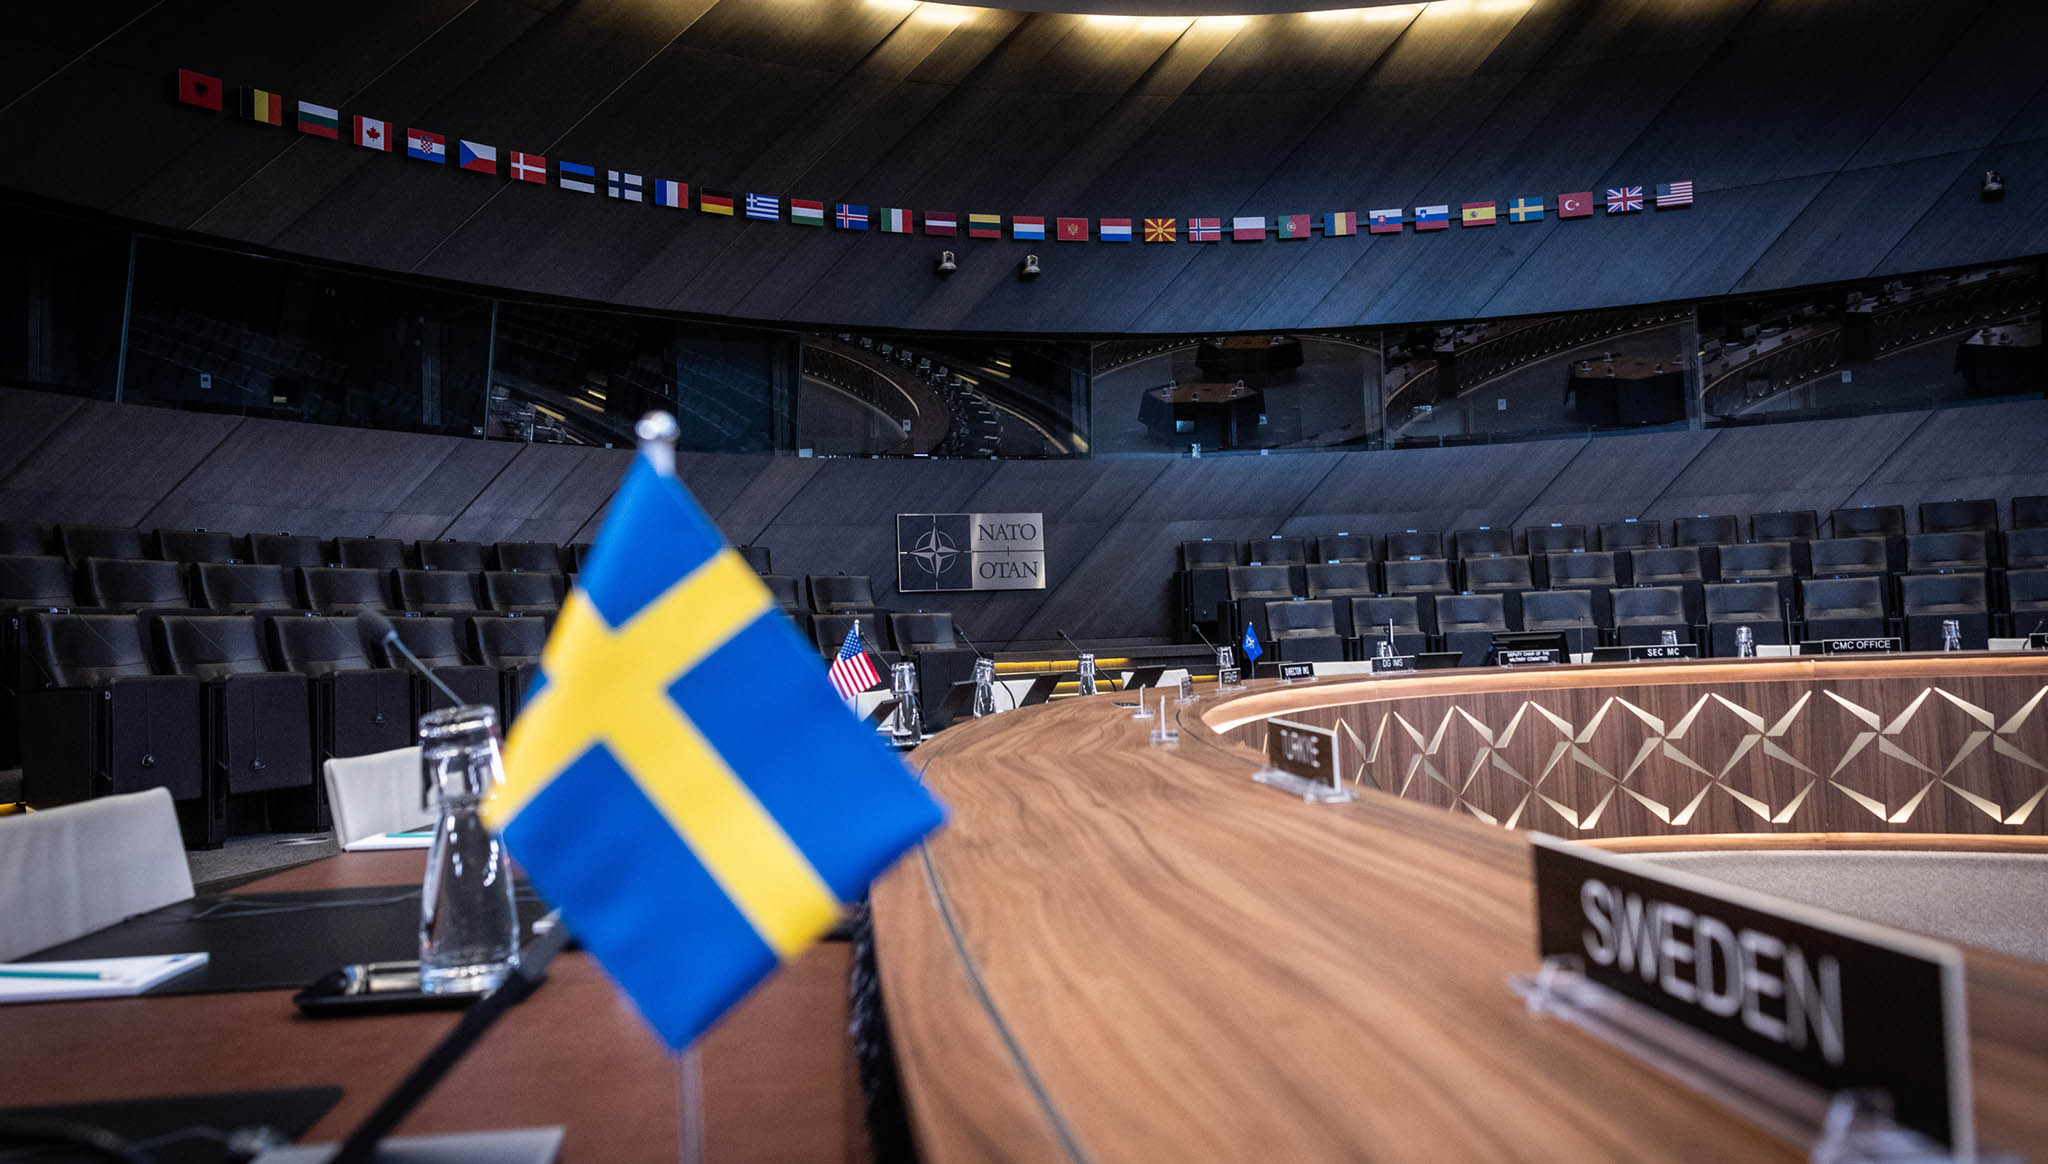 Sweden’s flag is installed at NATO’s headquarters in Brussels on March 11. (NATO)